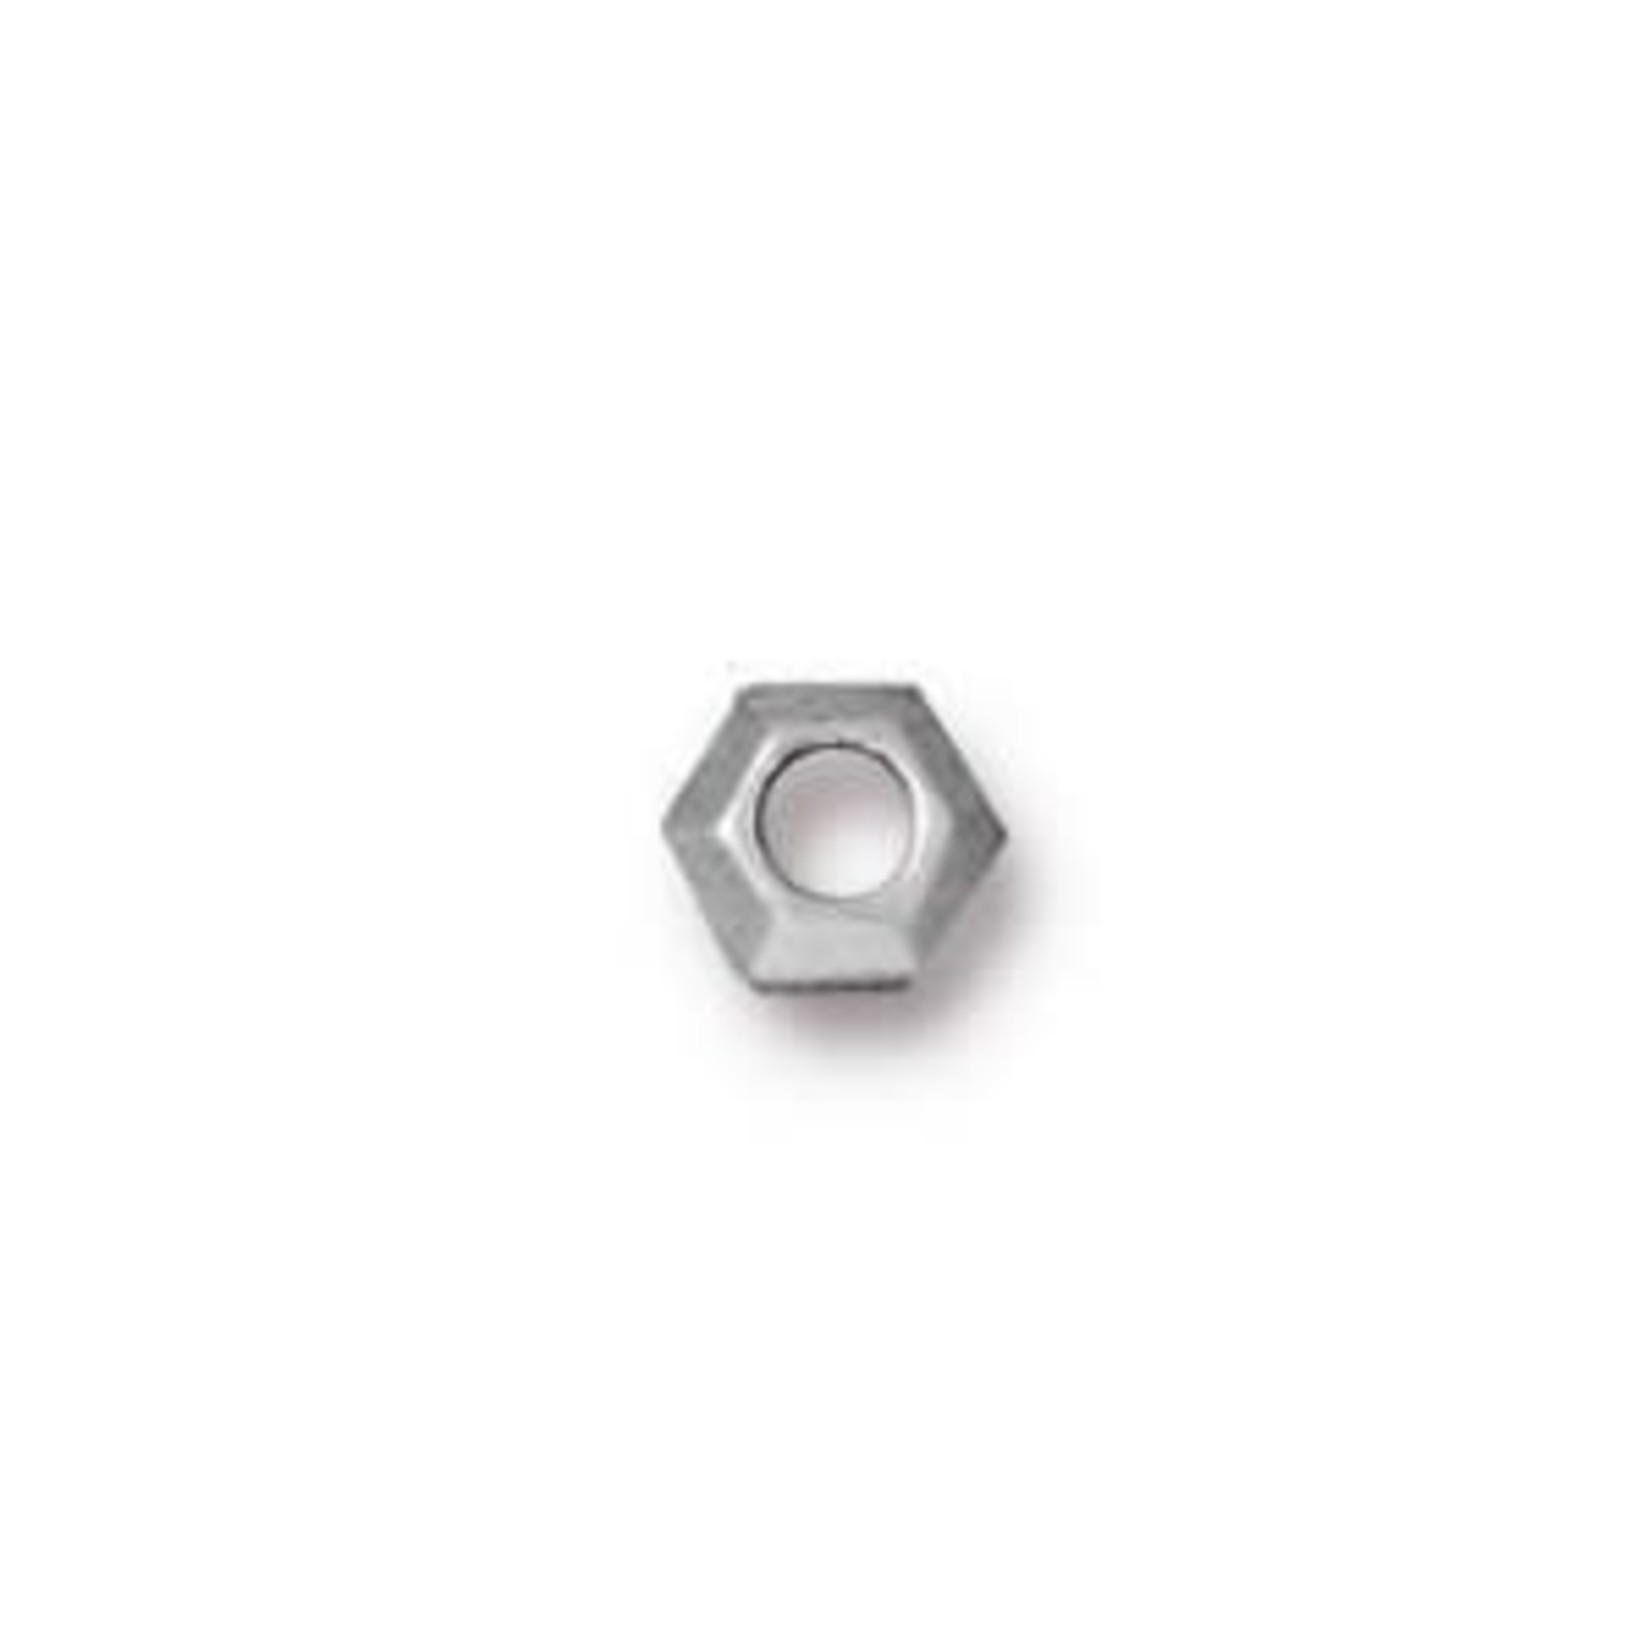 Faceted Hexagon 5mm Large Hole Spacer Bead Antique Silver